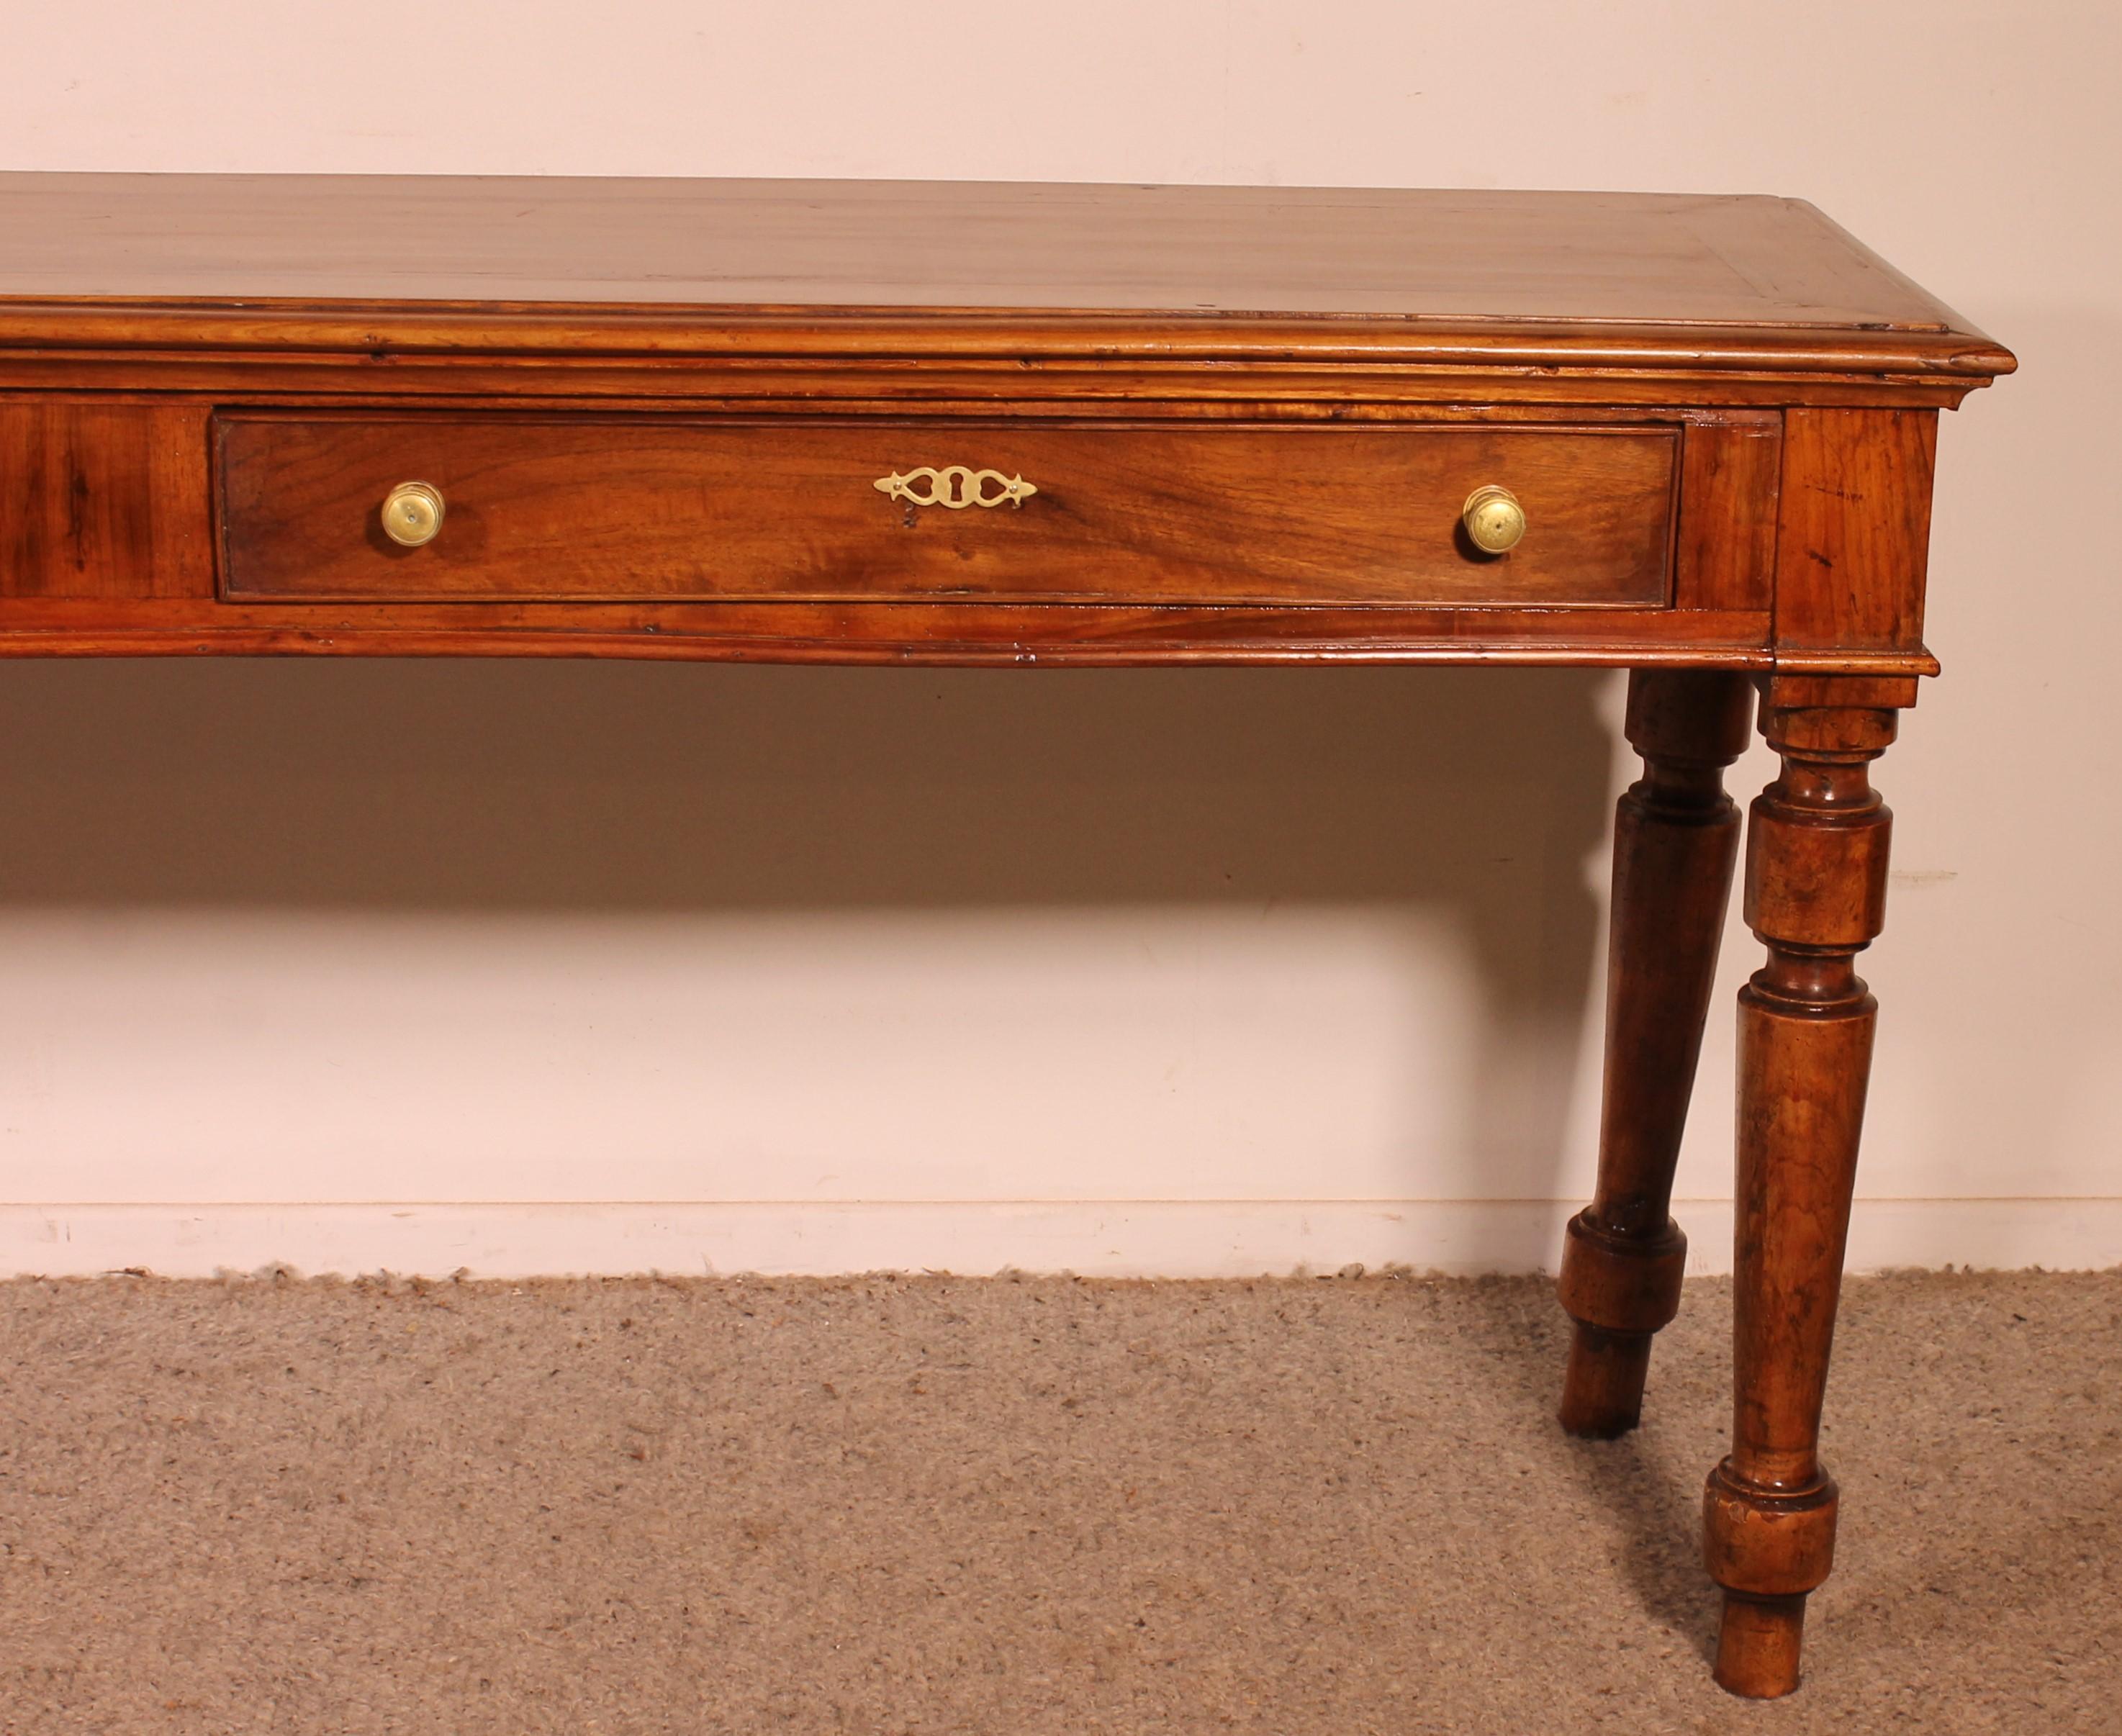 Louis Philippe Console In Cherry Wood With Two Drawers -19° Century From France